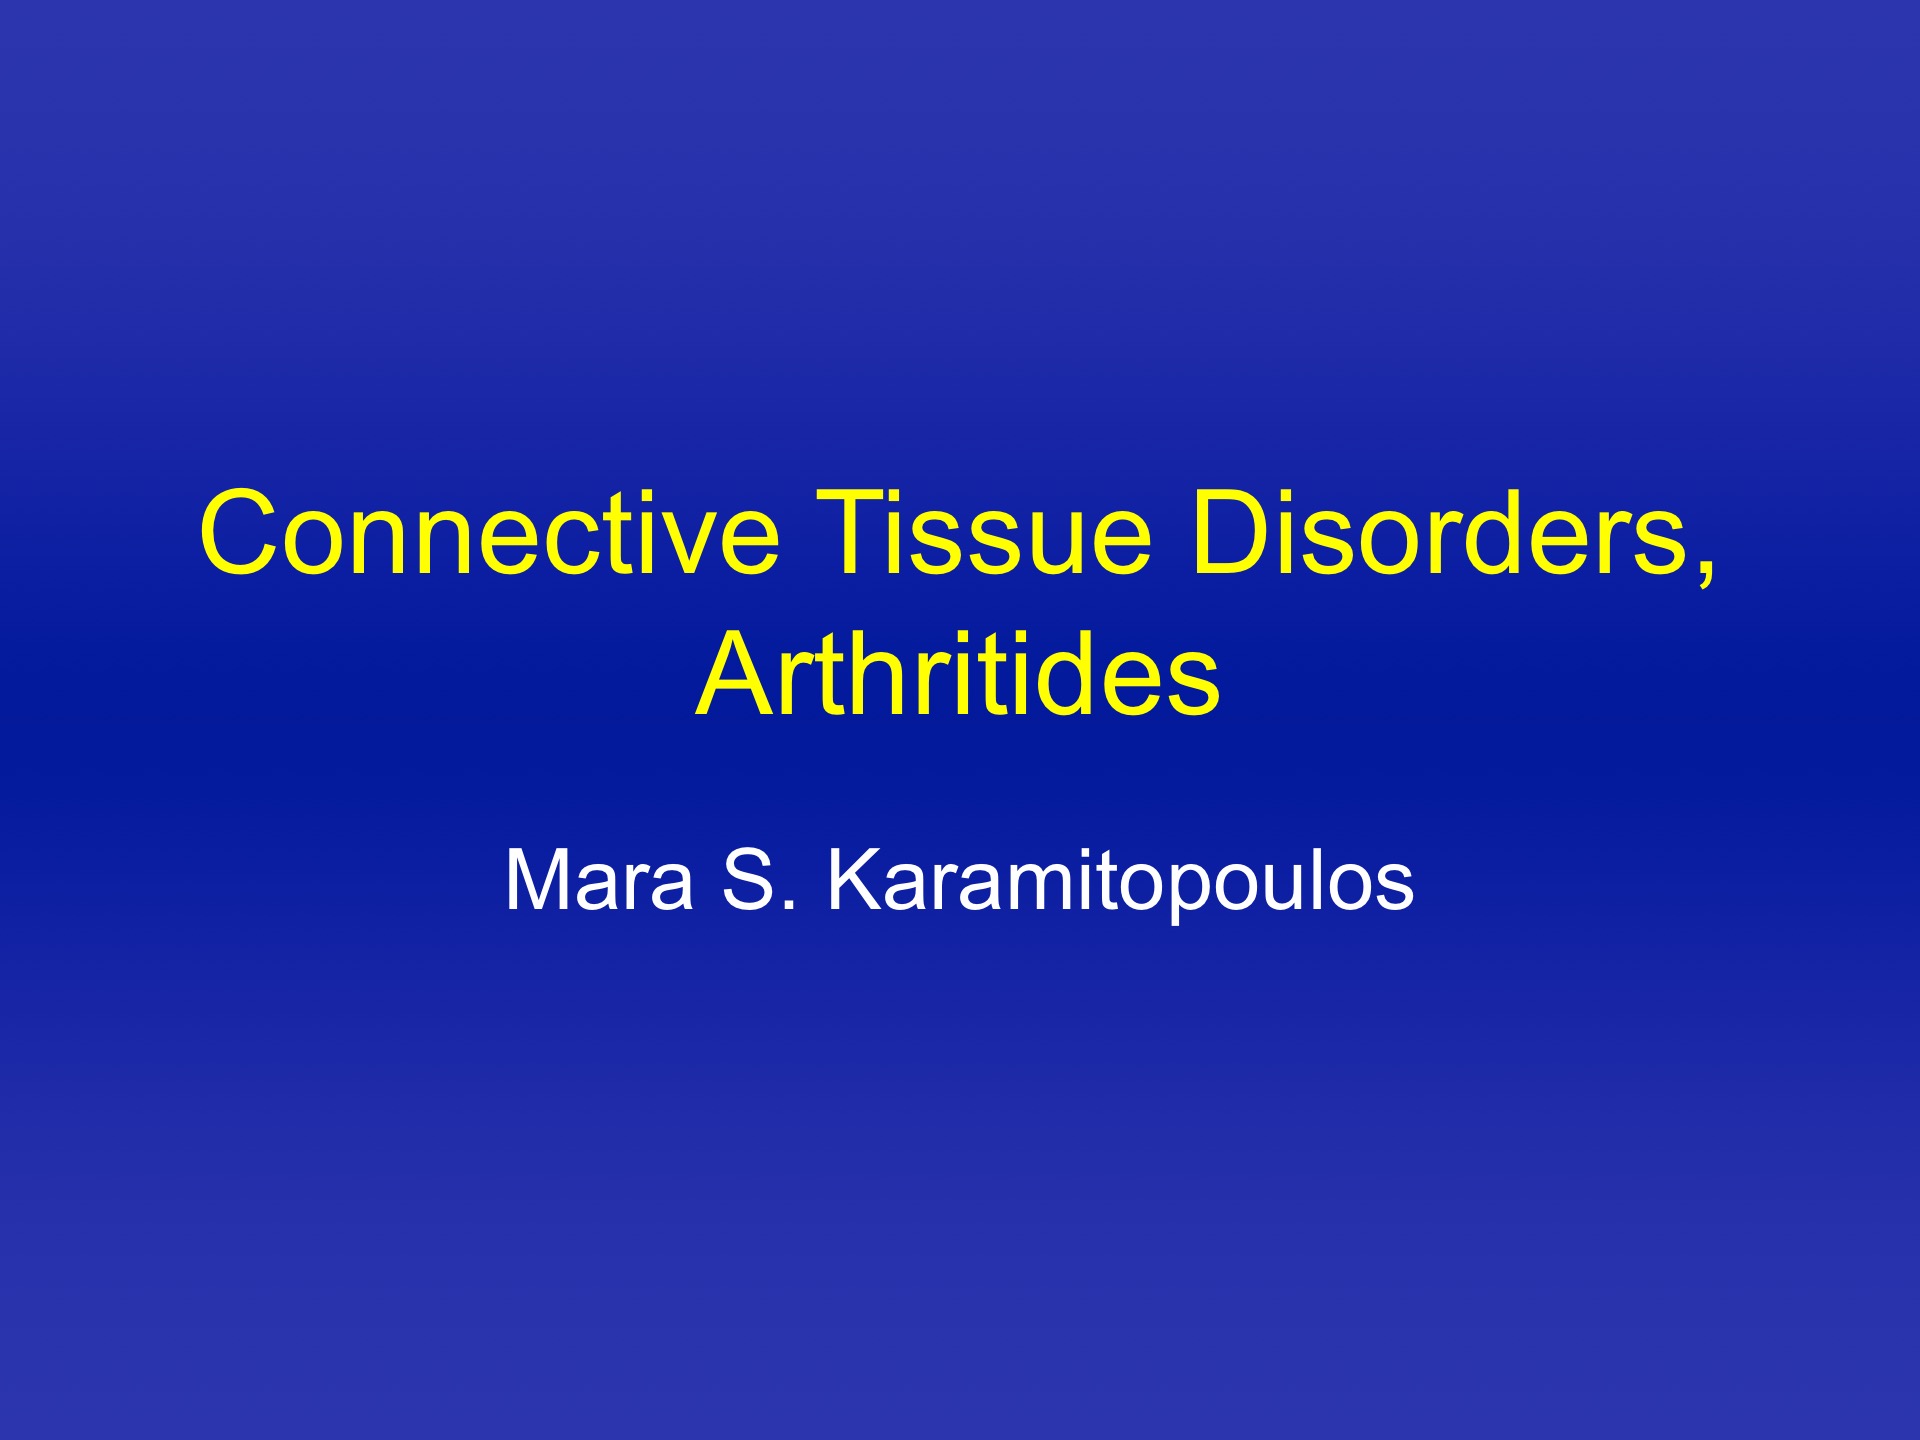 Connective Tissue Disorders and Arthritides